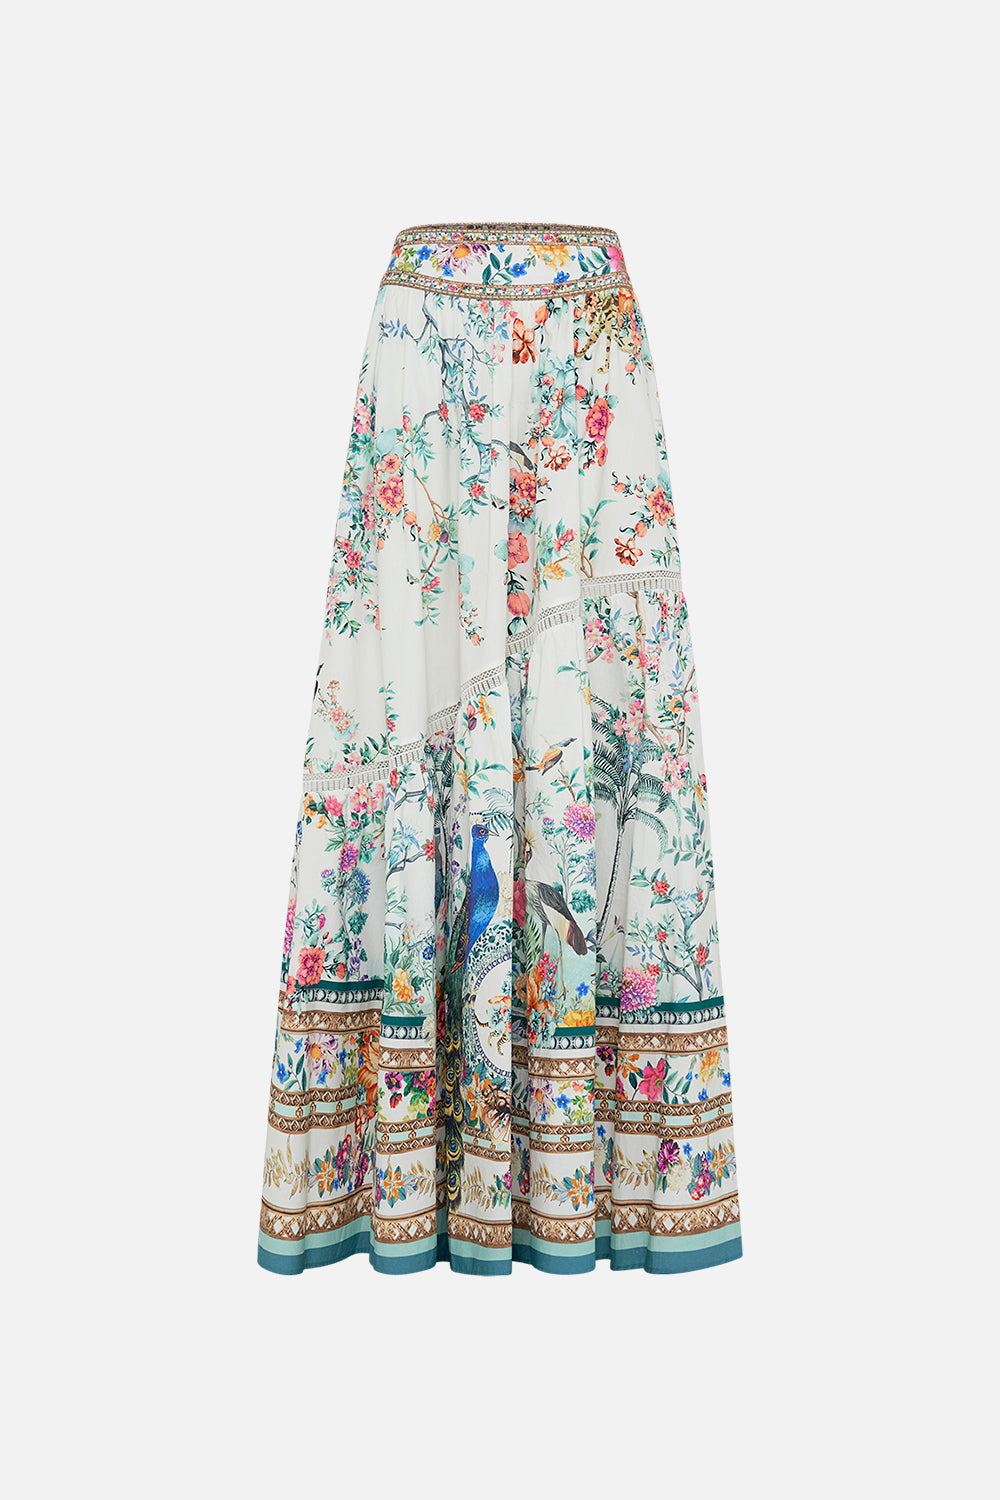 CAMILLA maxi skirt in Plumes and Parterres print